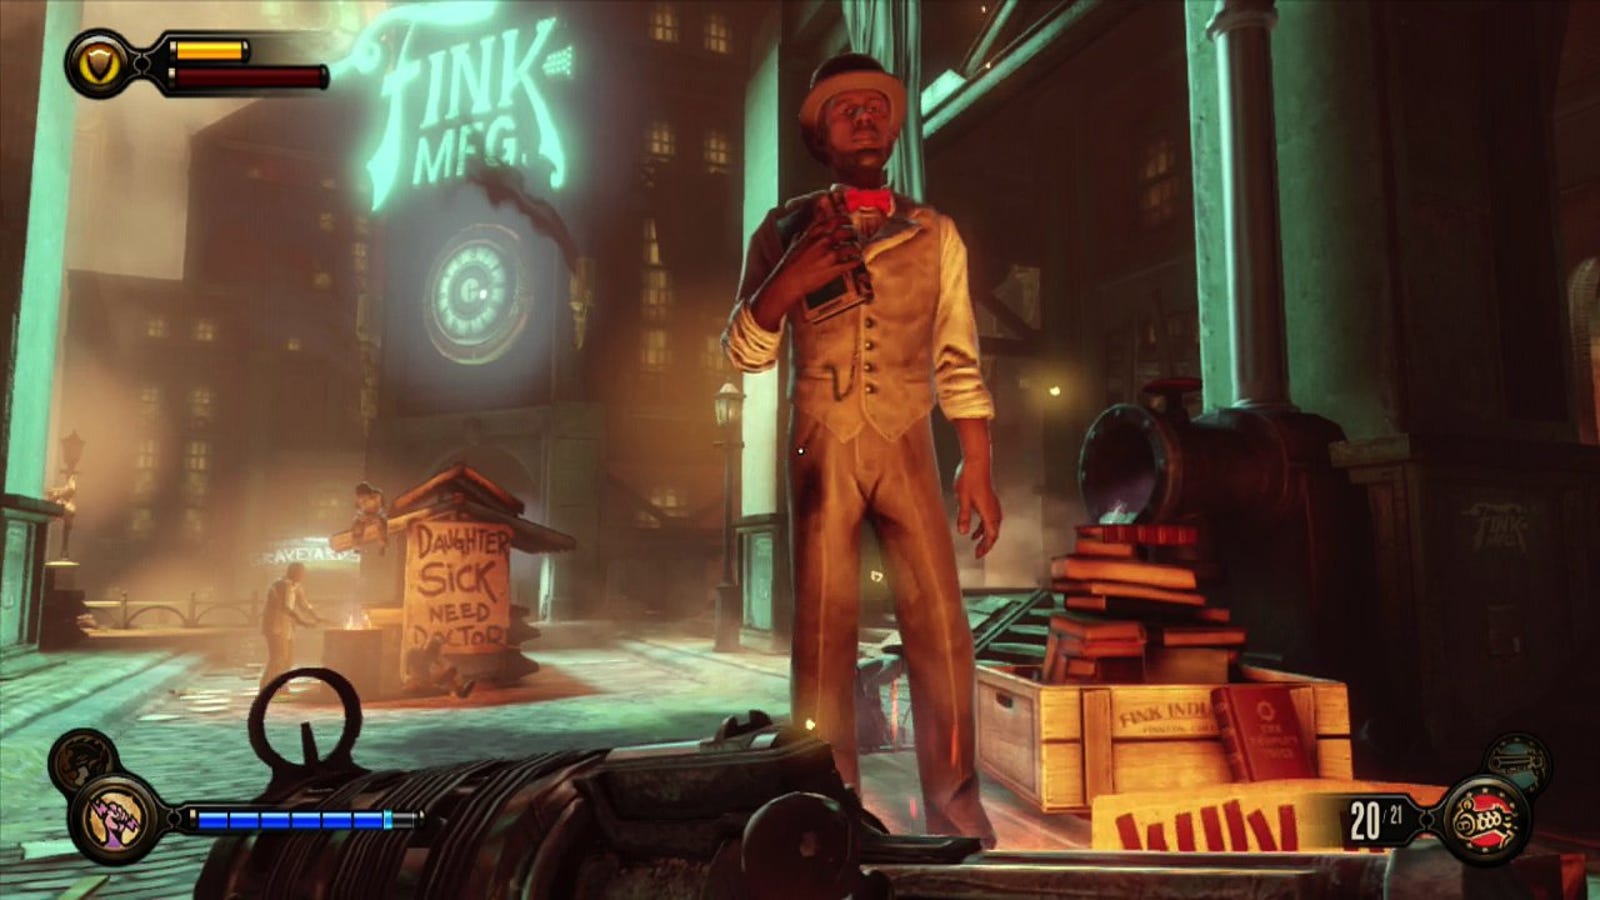 bioshock 2 collectibles guide with images